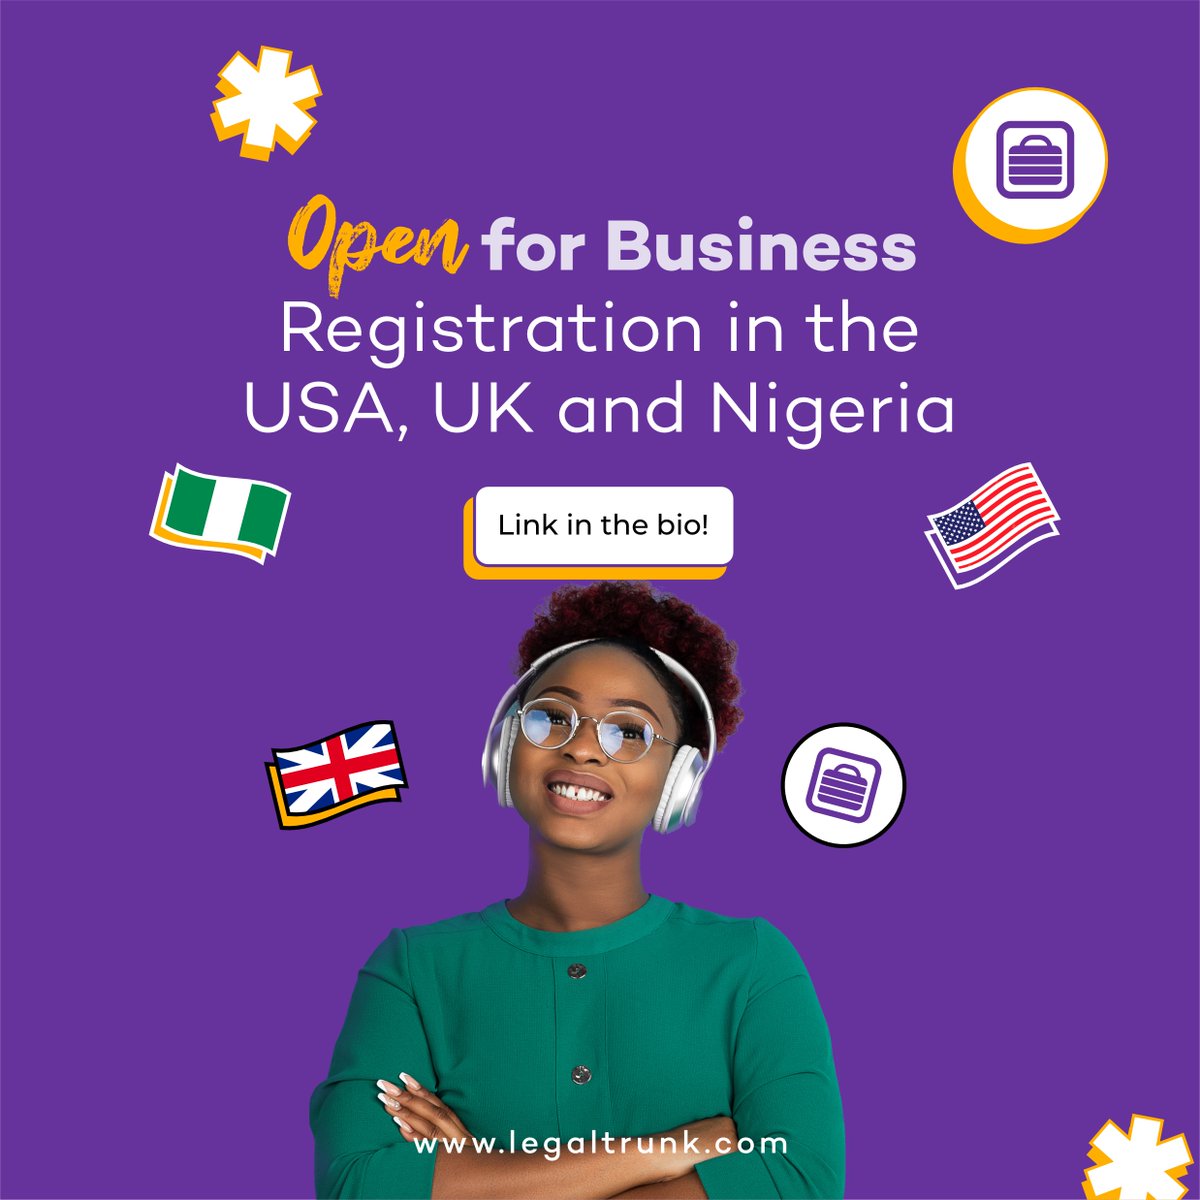 Our business incorporation service is available in the USA, UK and Nigeria. Let's help you turn your vision into reality. Please send us a DM.🚀 #GlobalEntrepreneurship #StartYourJourney